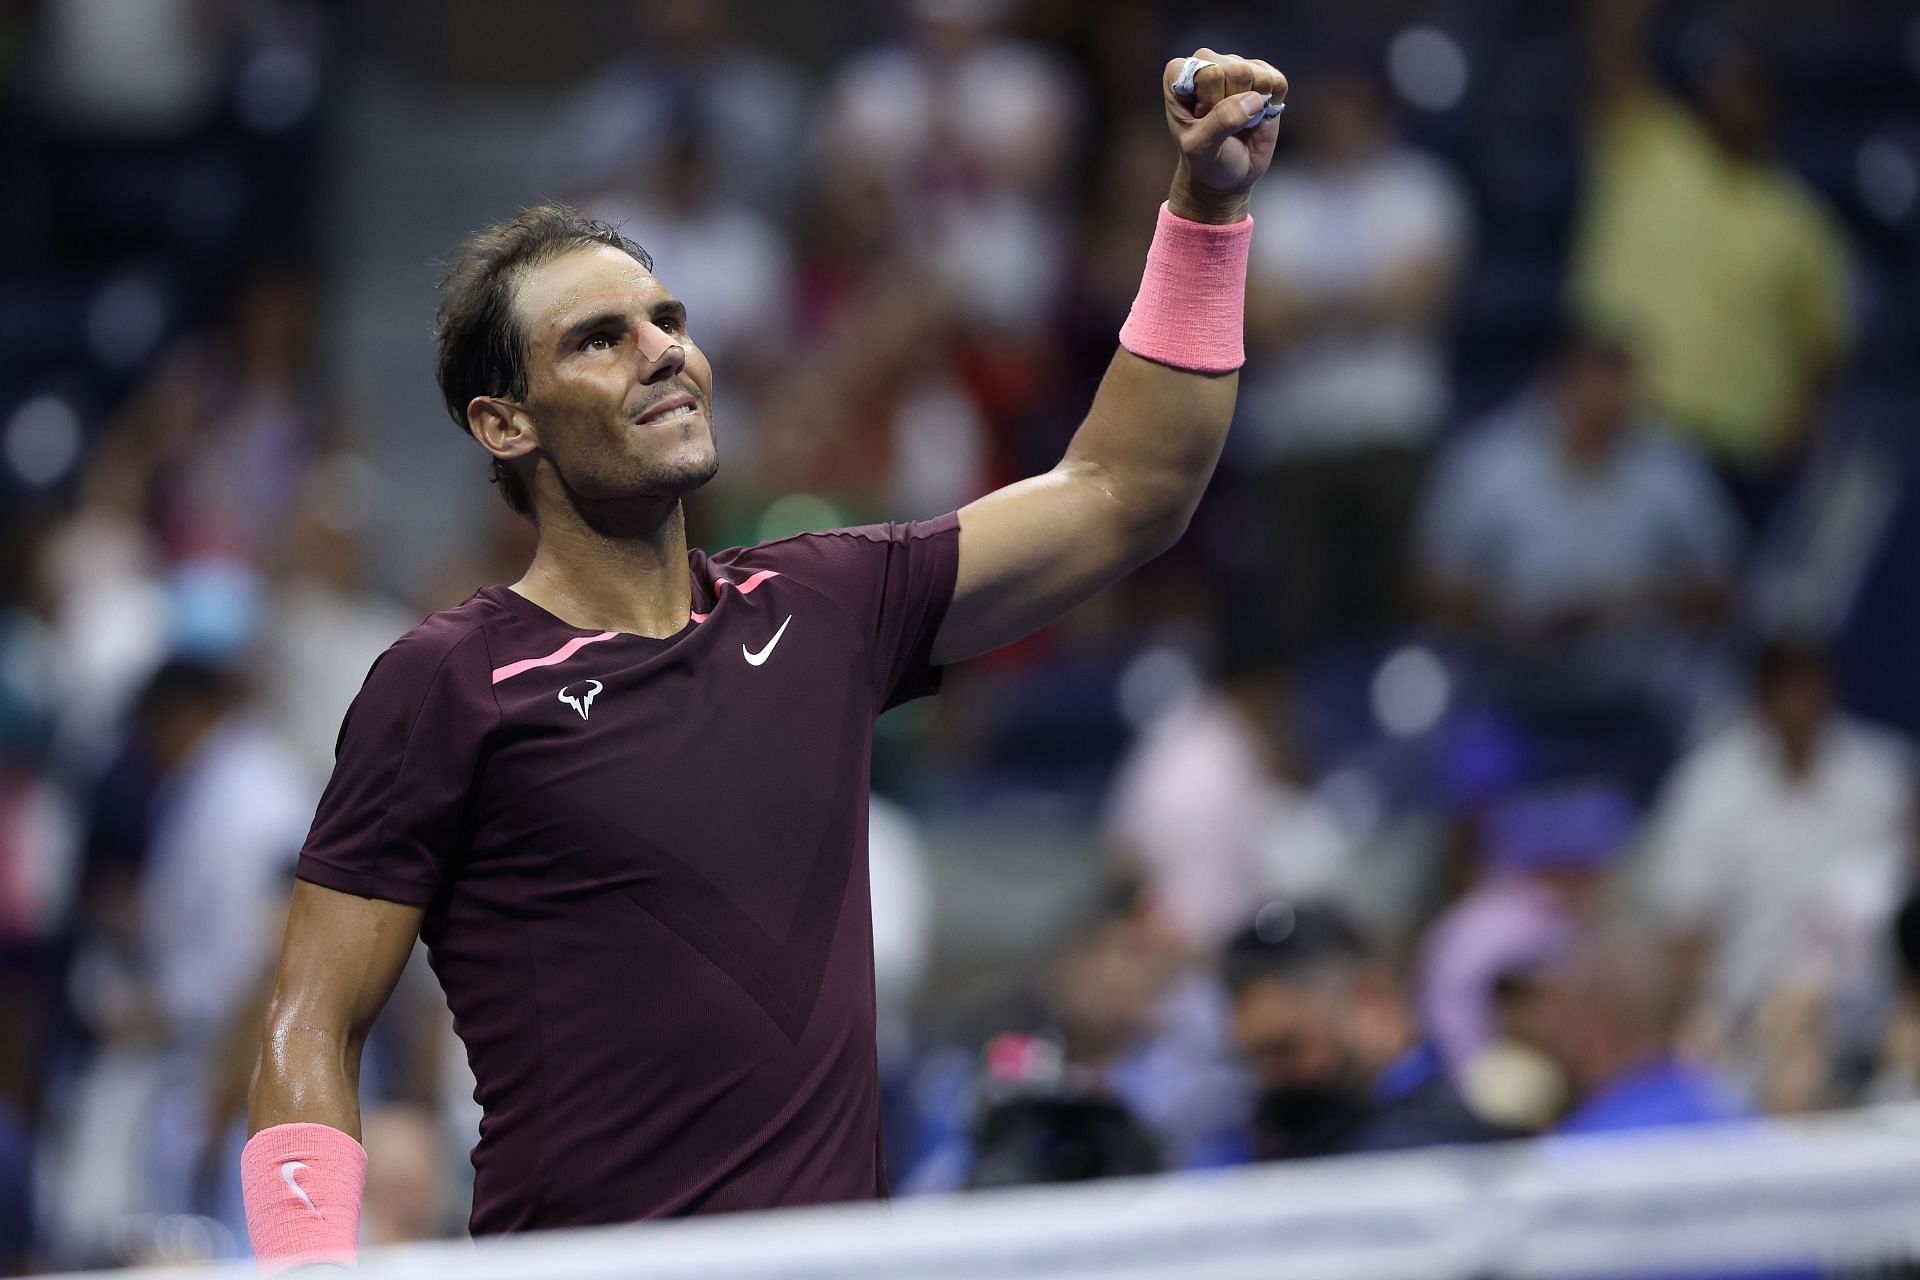 Rafael Nadal is gunning for his first Paris Masters title.